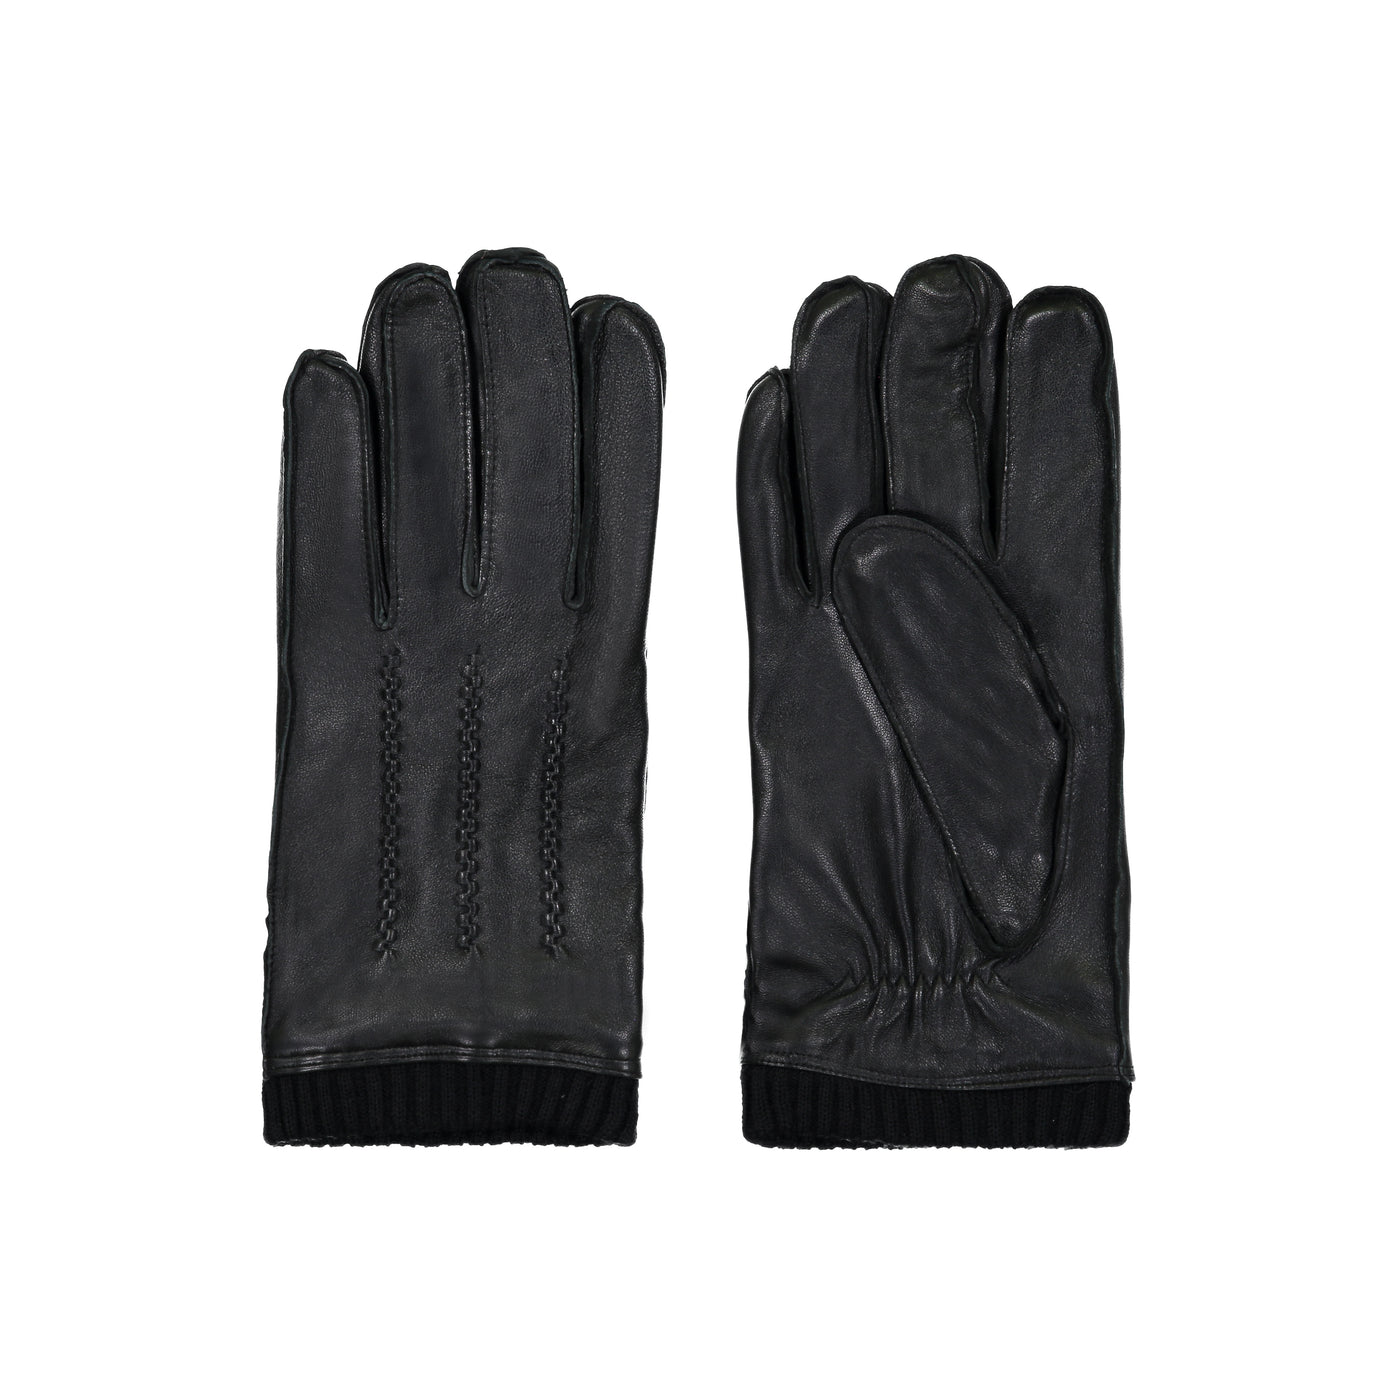 Men's Sheepskin Leather Glove With Faux Fur